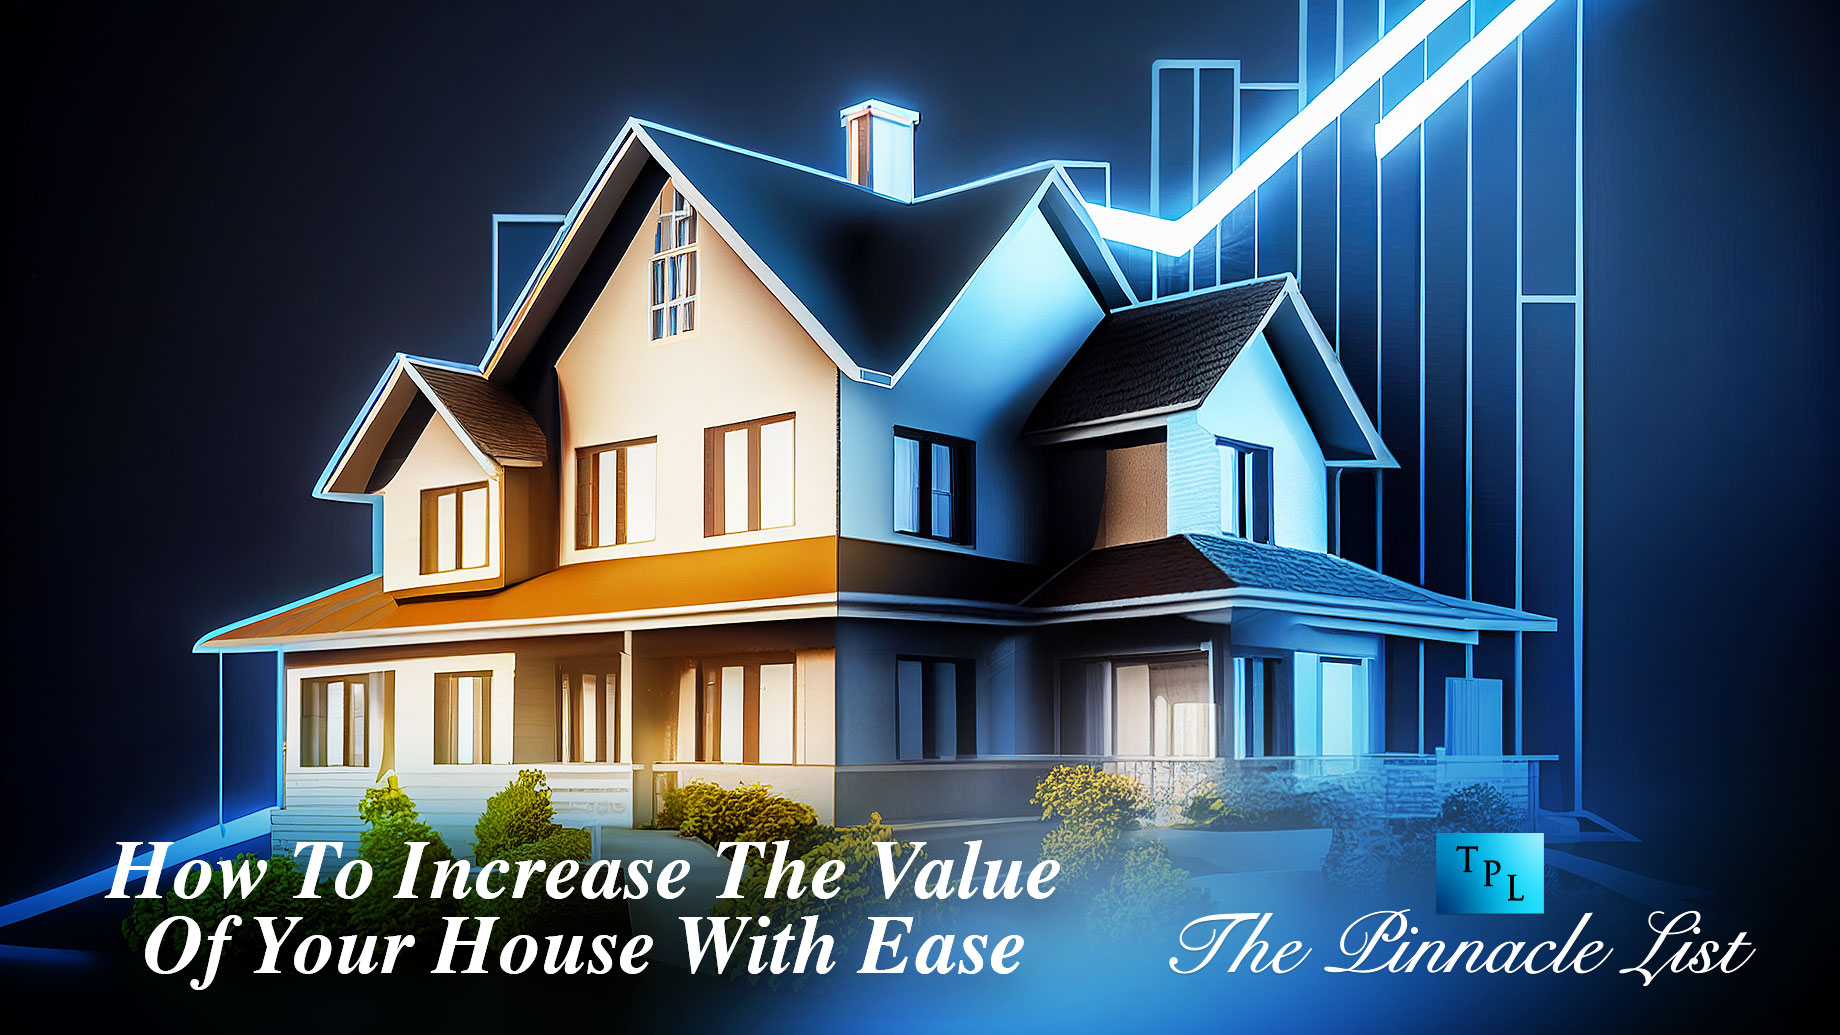 How To Increase The Value Of Your House With Ease